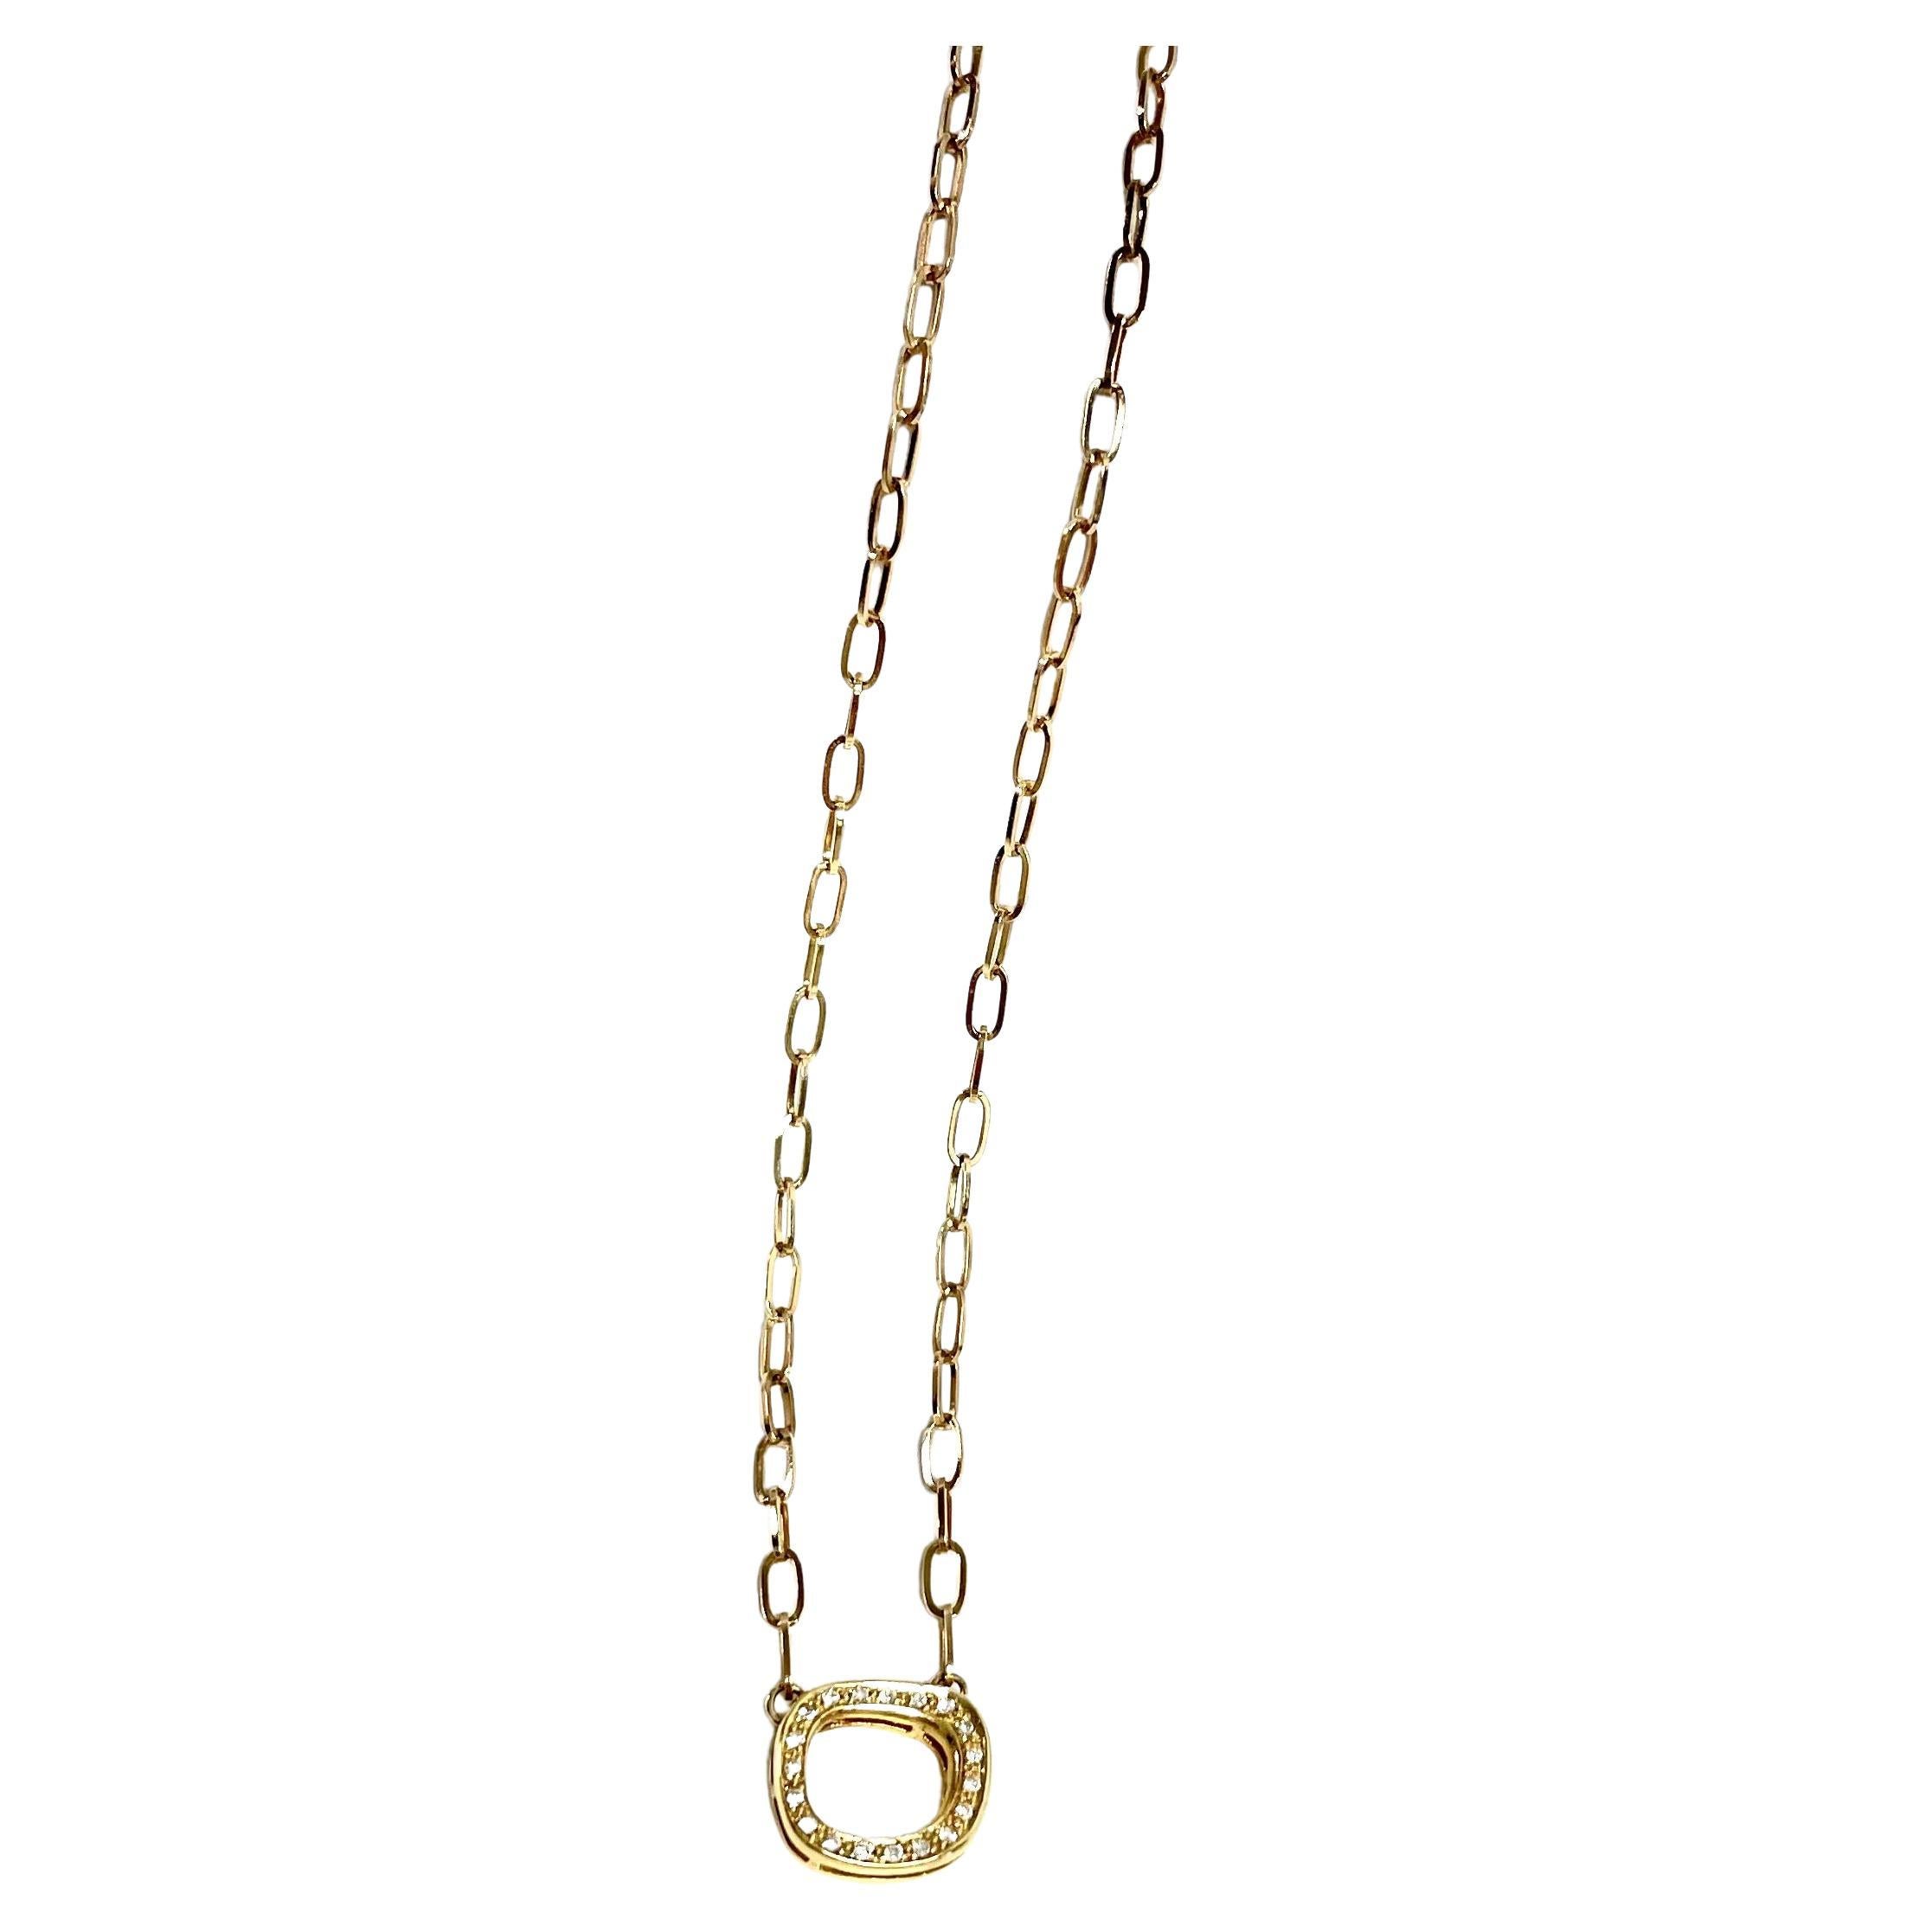 Pave Diamond Pendant with Gold Chain Necklace 4